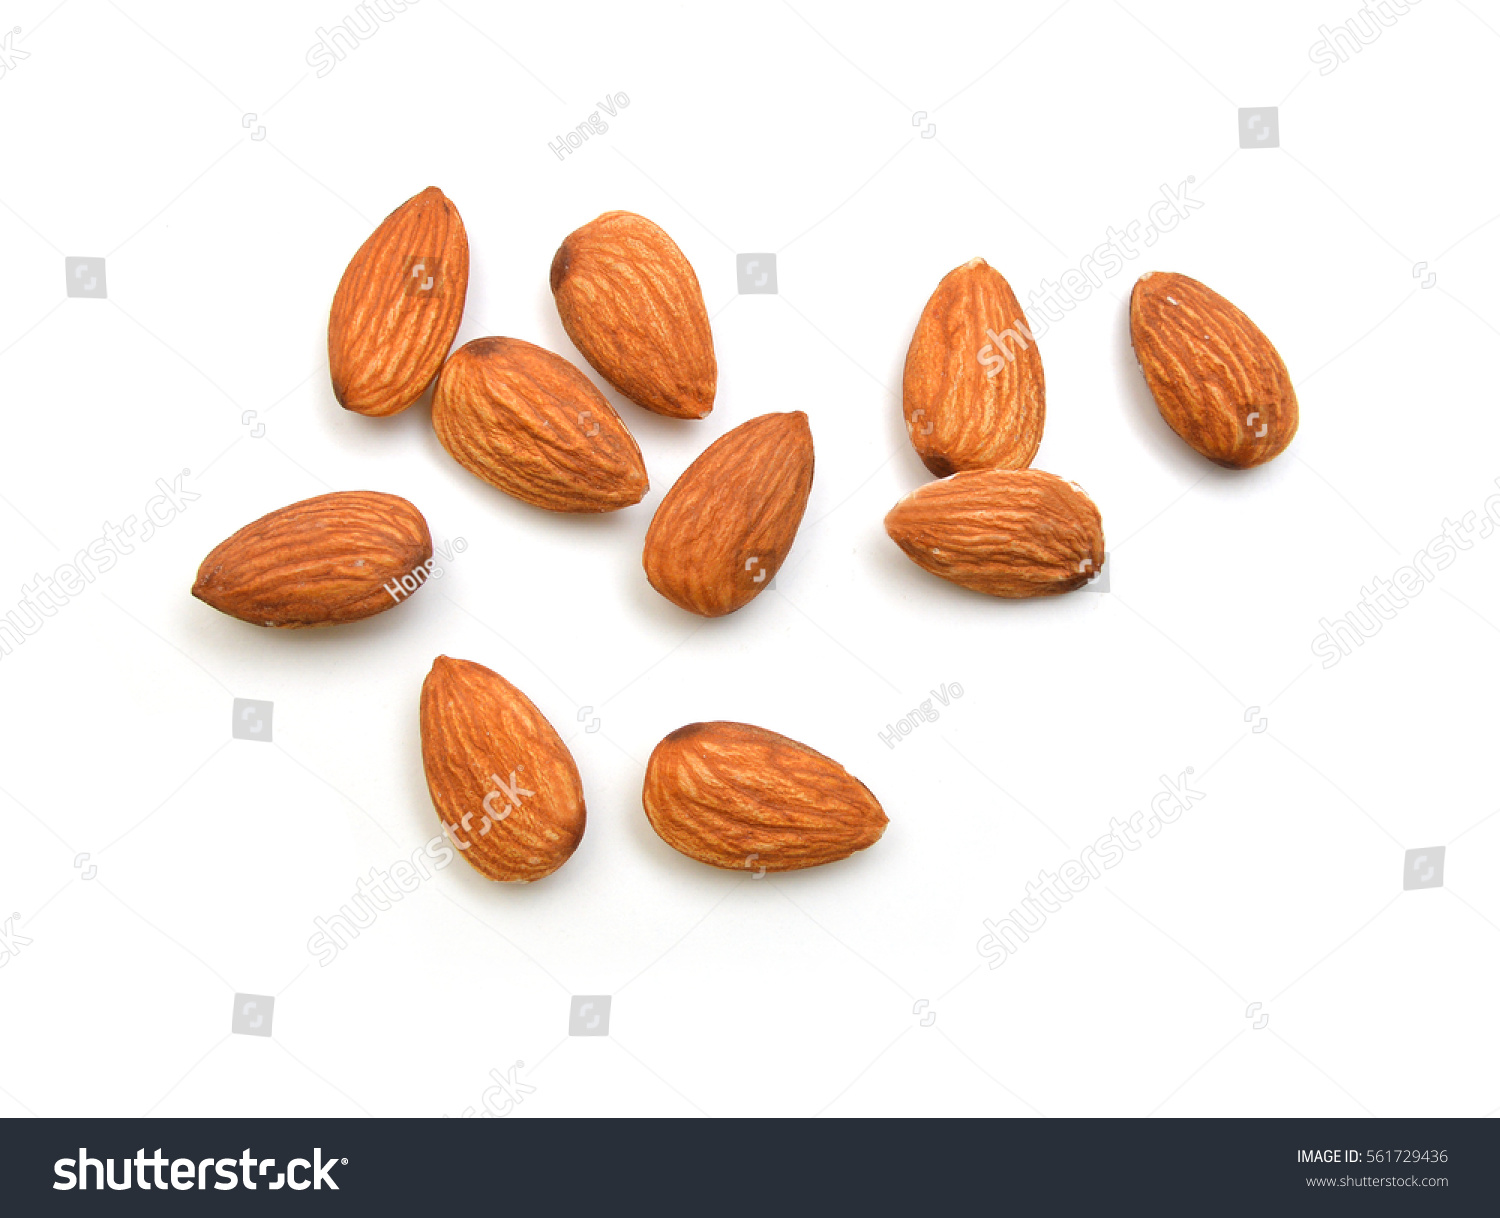 Almonds isolated on white background #561729436